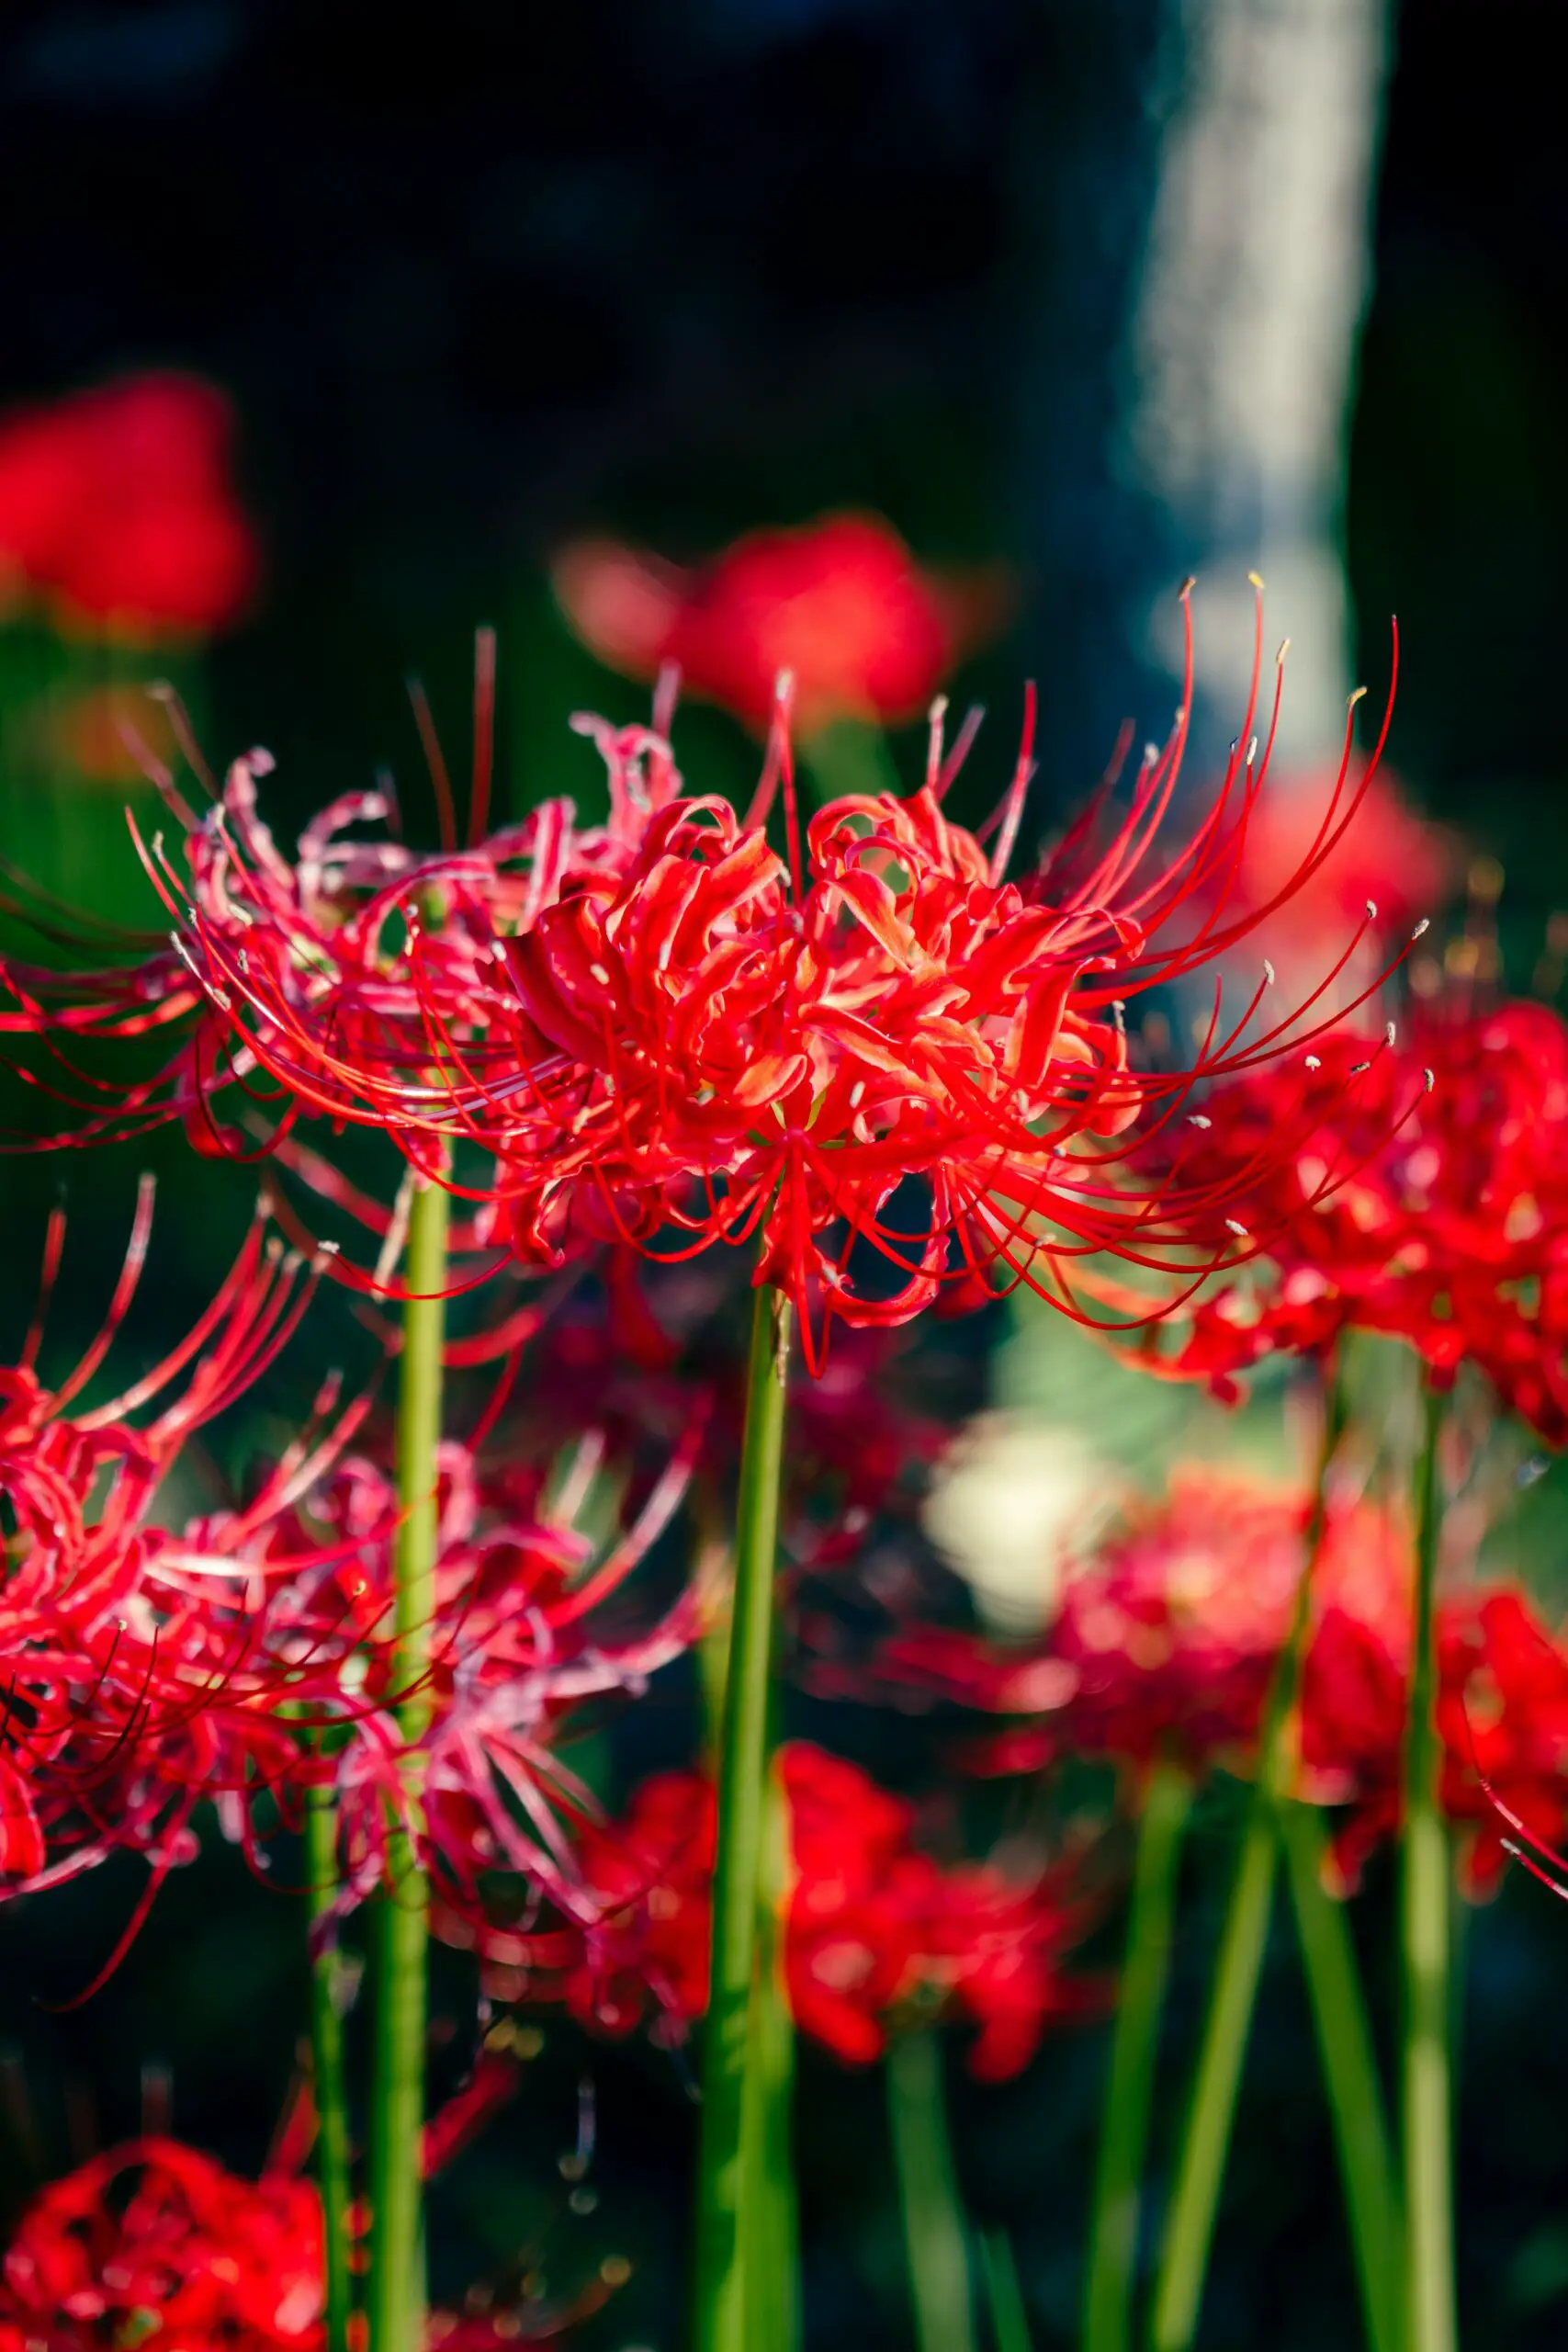 Spider lily meaning